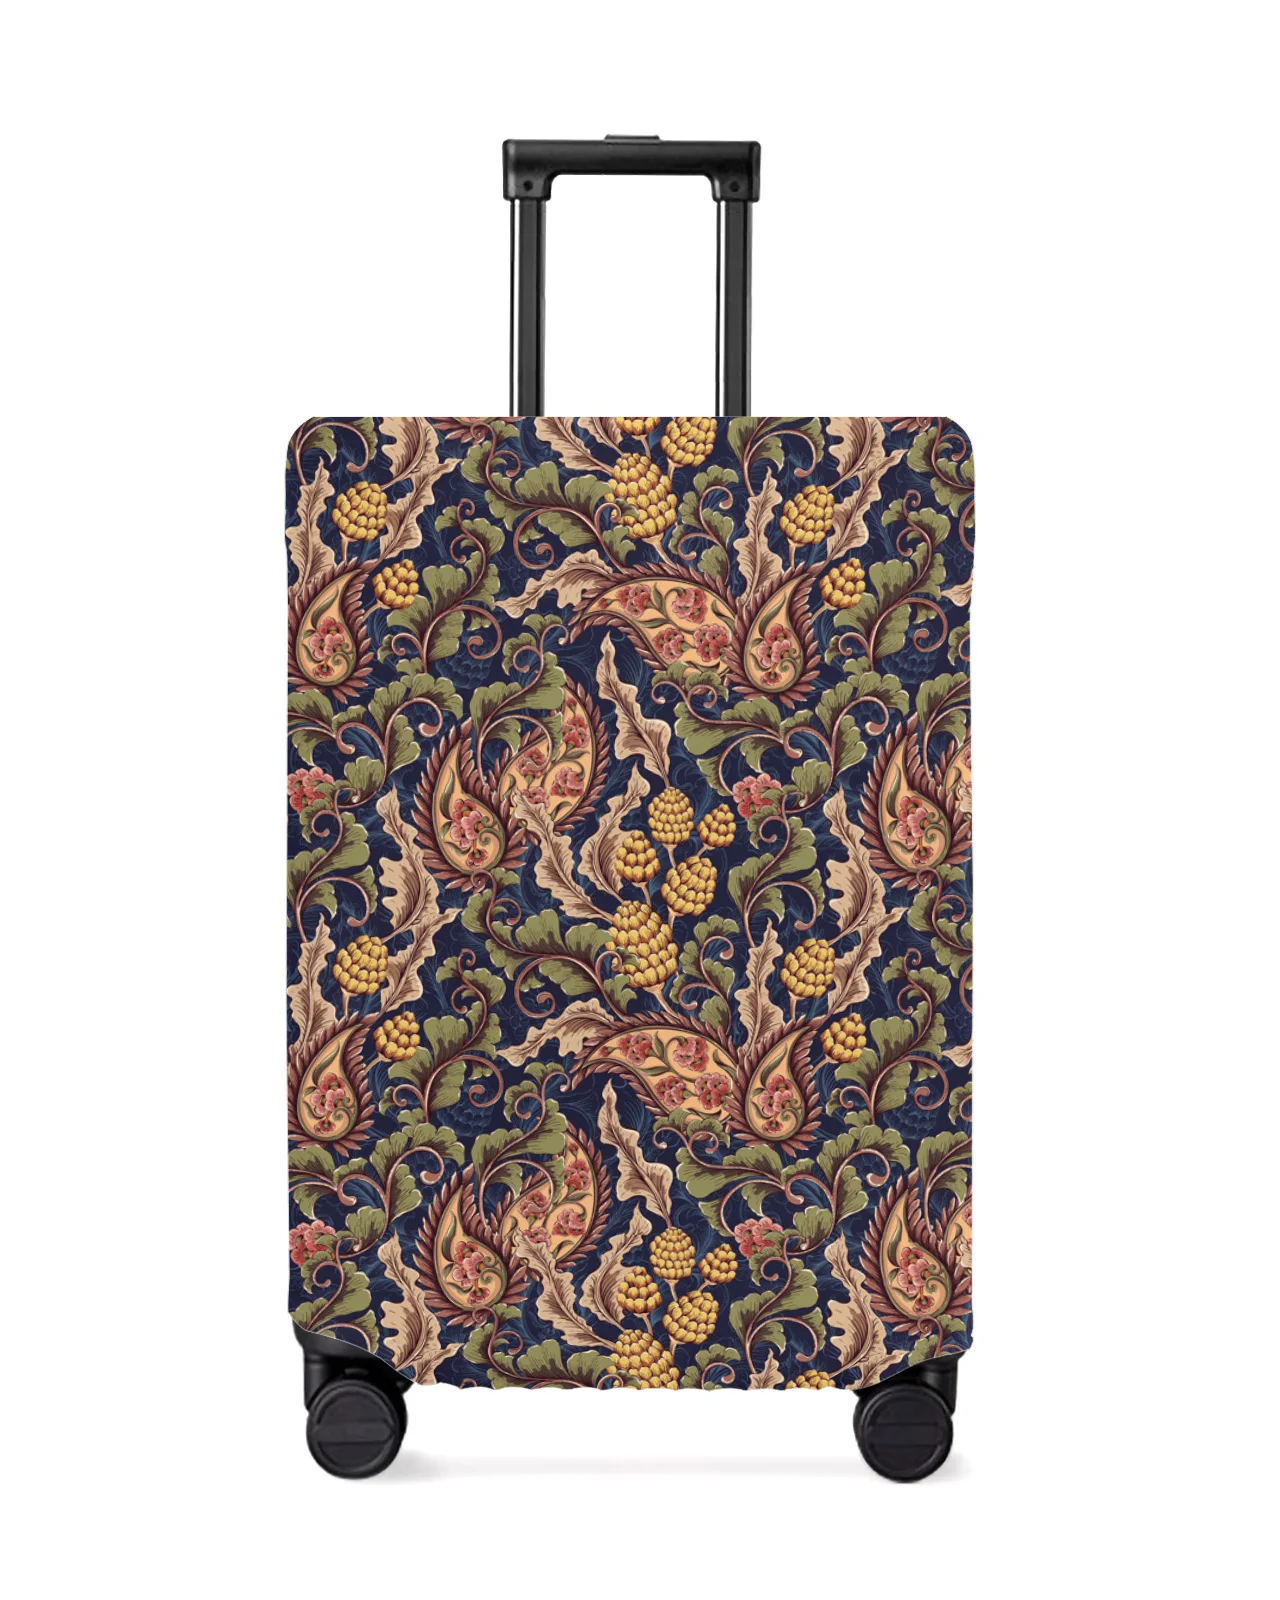 paisley-pattern-plant-leaves-travel-luggage-protective-cover-for-travel-accessories-suitcase-elastic-dust-case-protect-sleeve